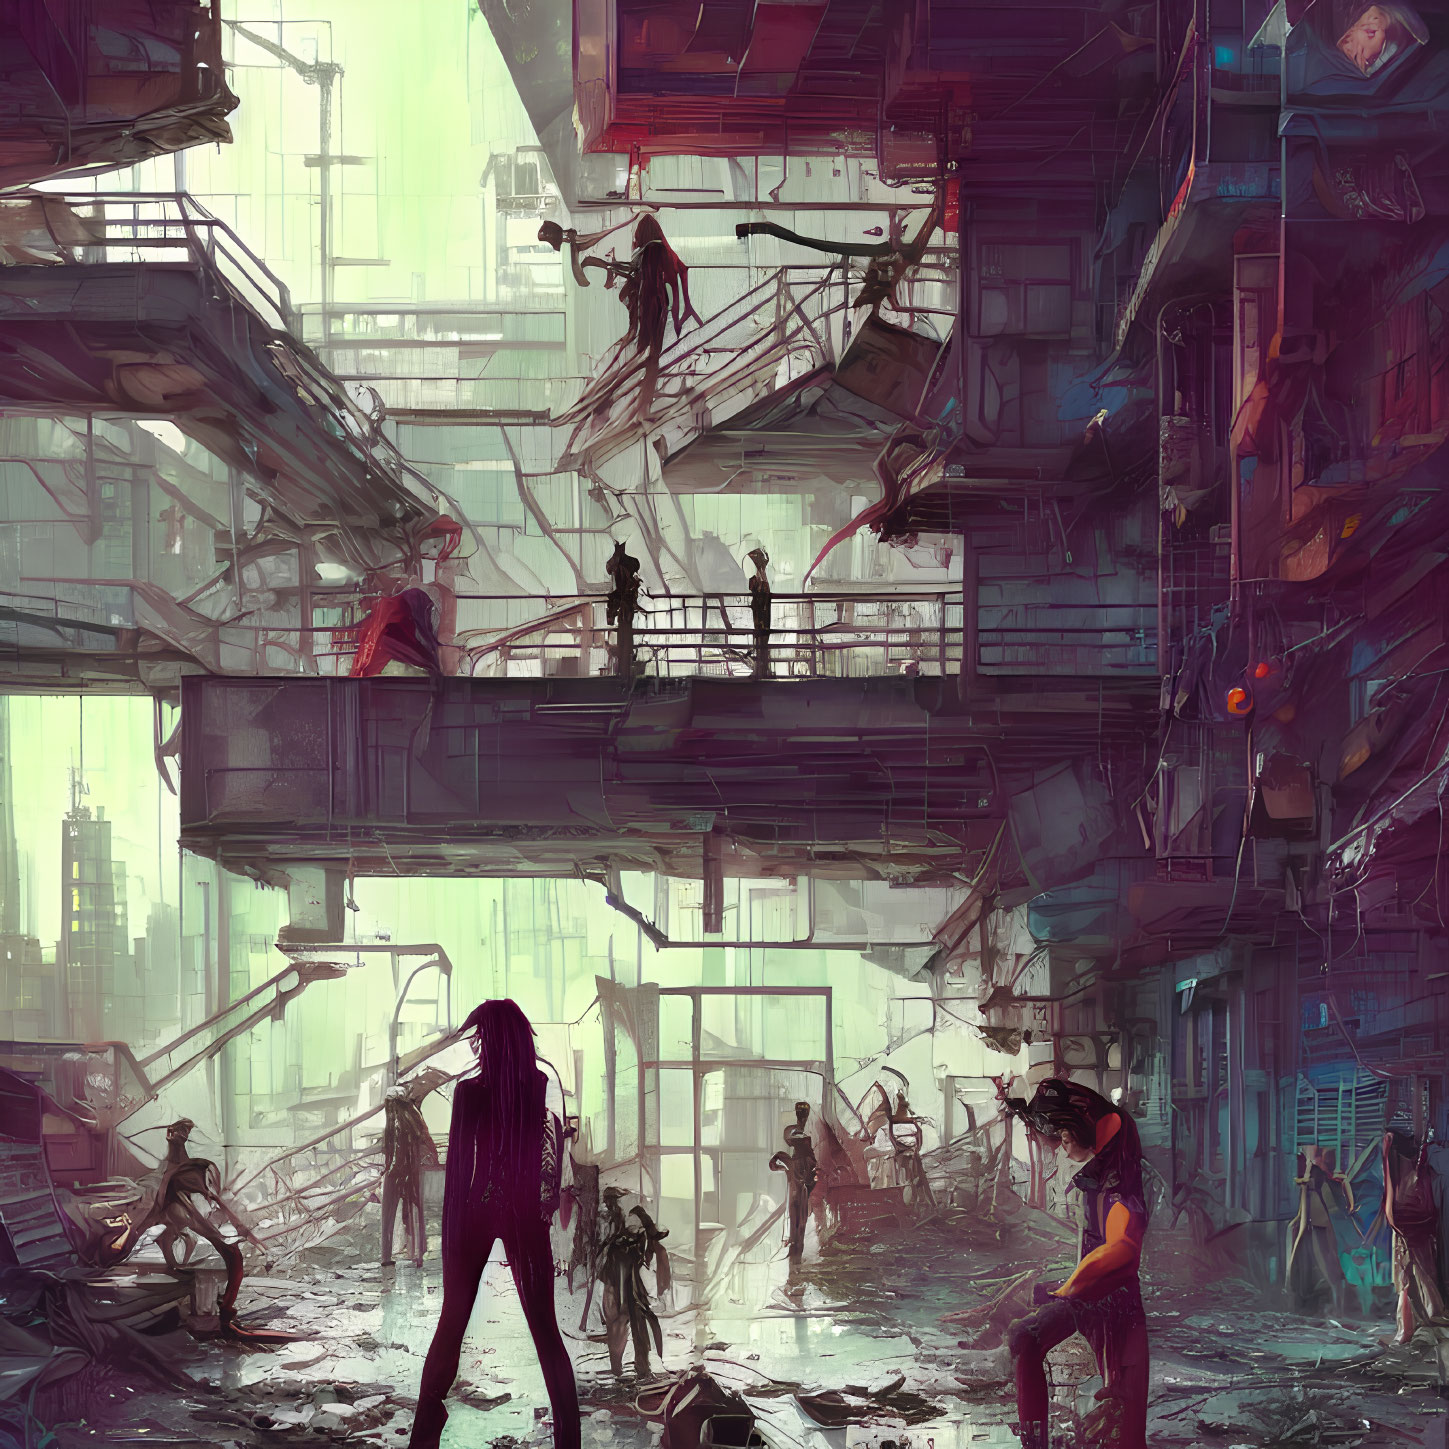 Dystopian cityscape with dilapidated structures and people in decay.